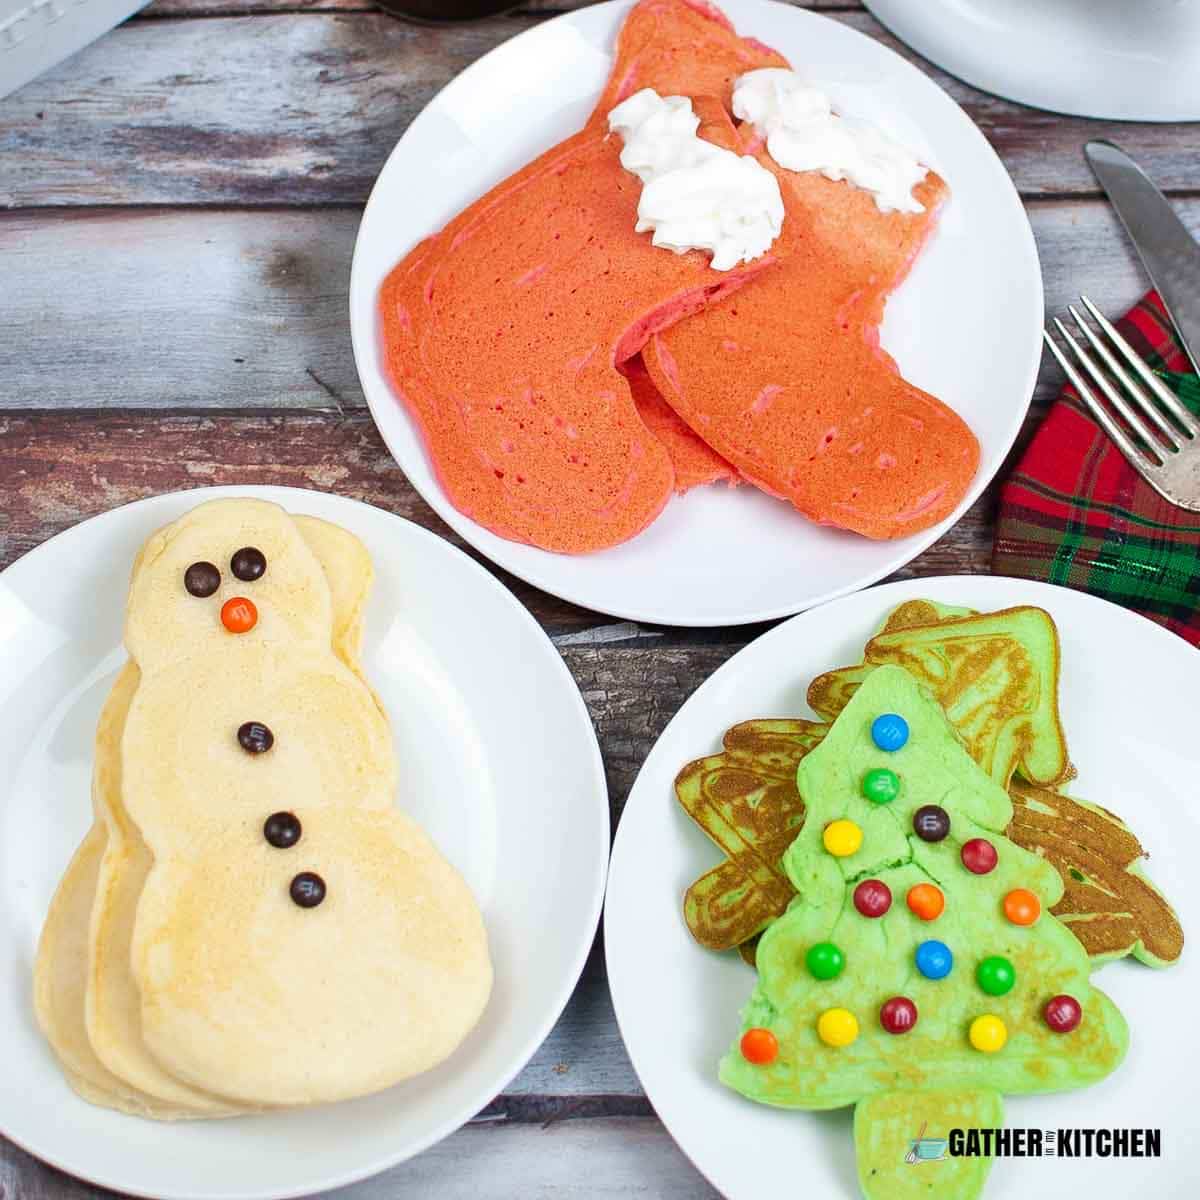 Christmas shaped pancakes on three plates - one stocking, one with snowmen pancakes, and one with Christmas tree pancakes.